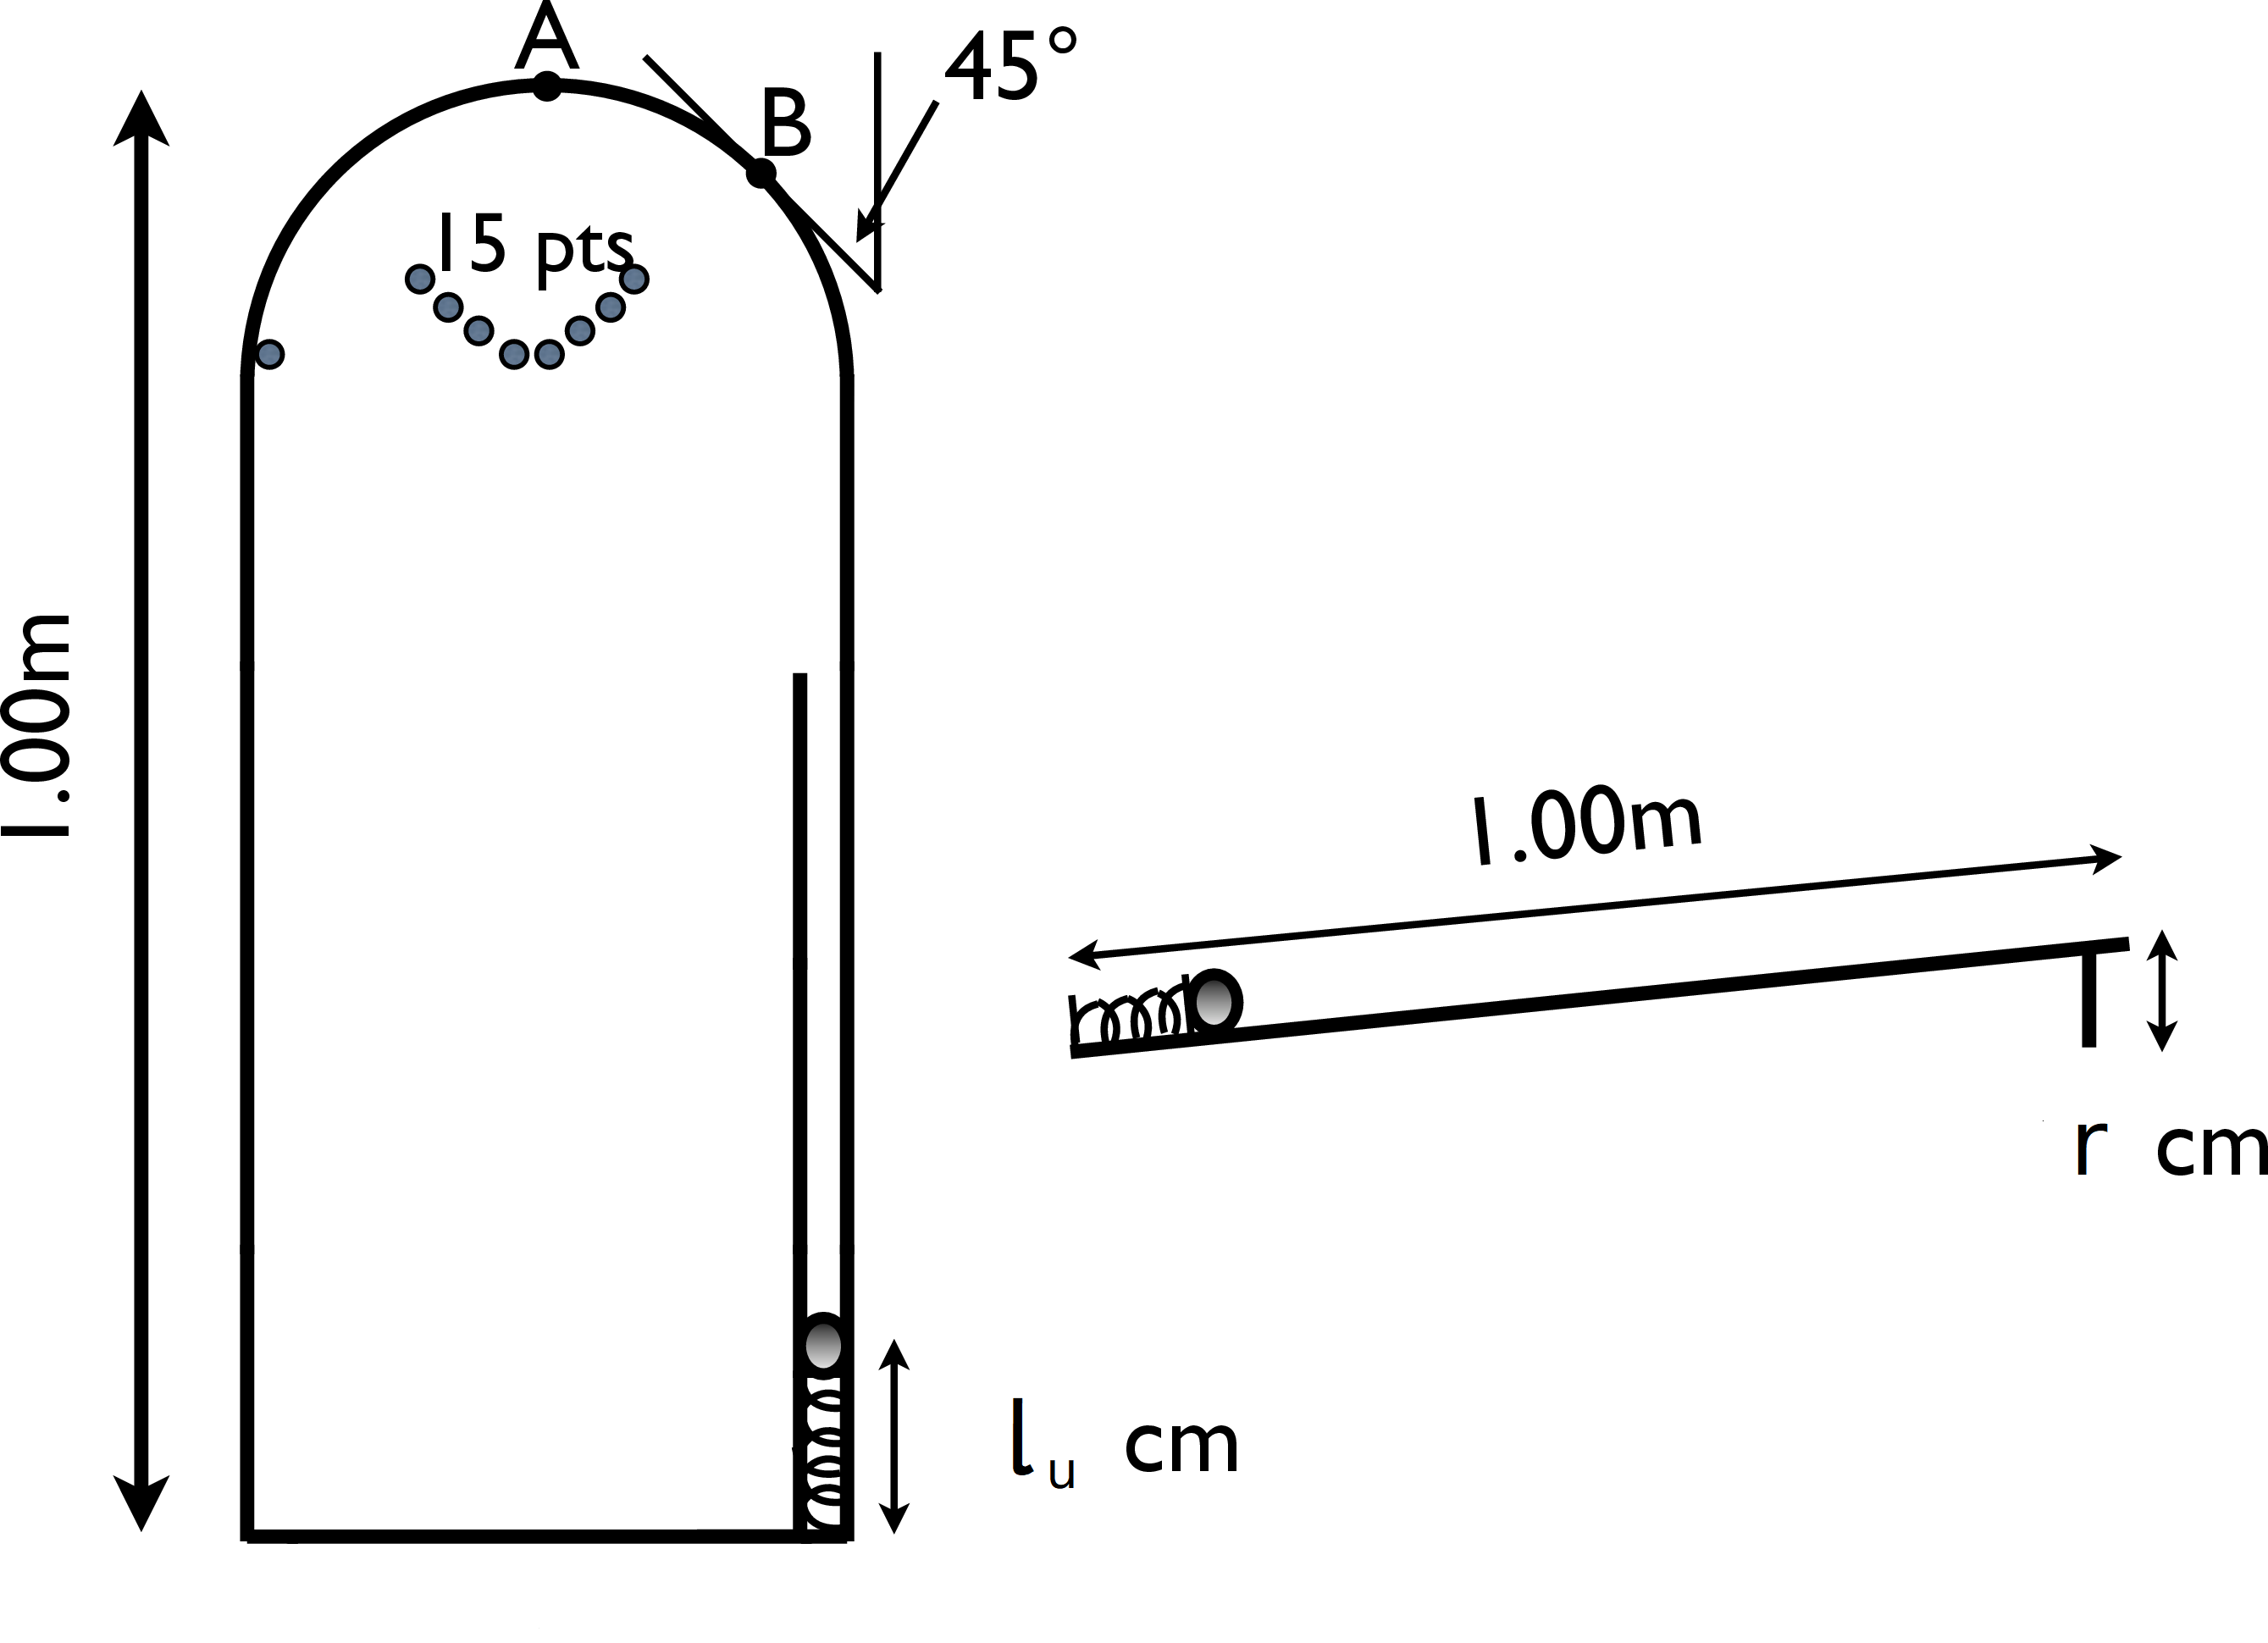 Figure of a ball of length 1 metre with a semi-circular top. The highest point is A and the tangent line to a point B on the circular surface meets a straight vertical line at 45 degrees. The pinball is suspended atop of a spring in a track with a rise of r cm on the right side of the board.